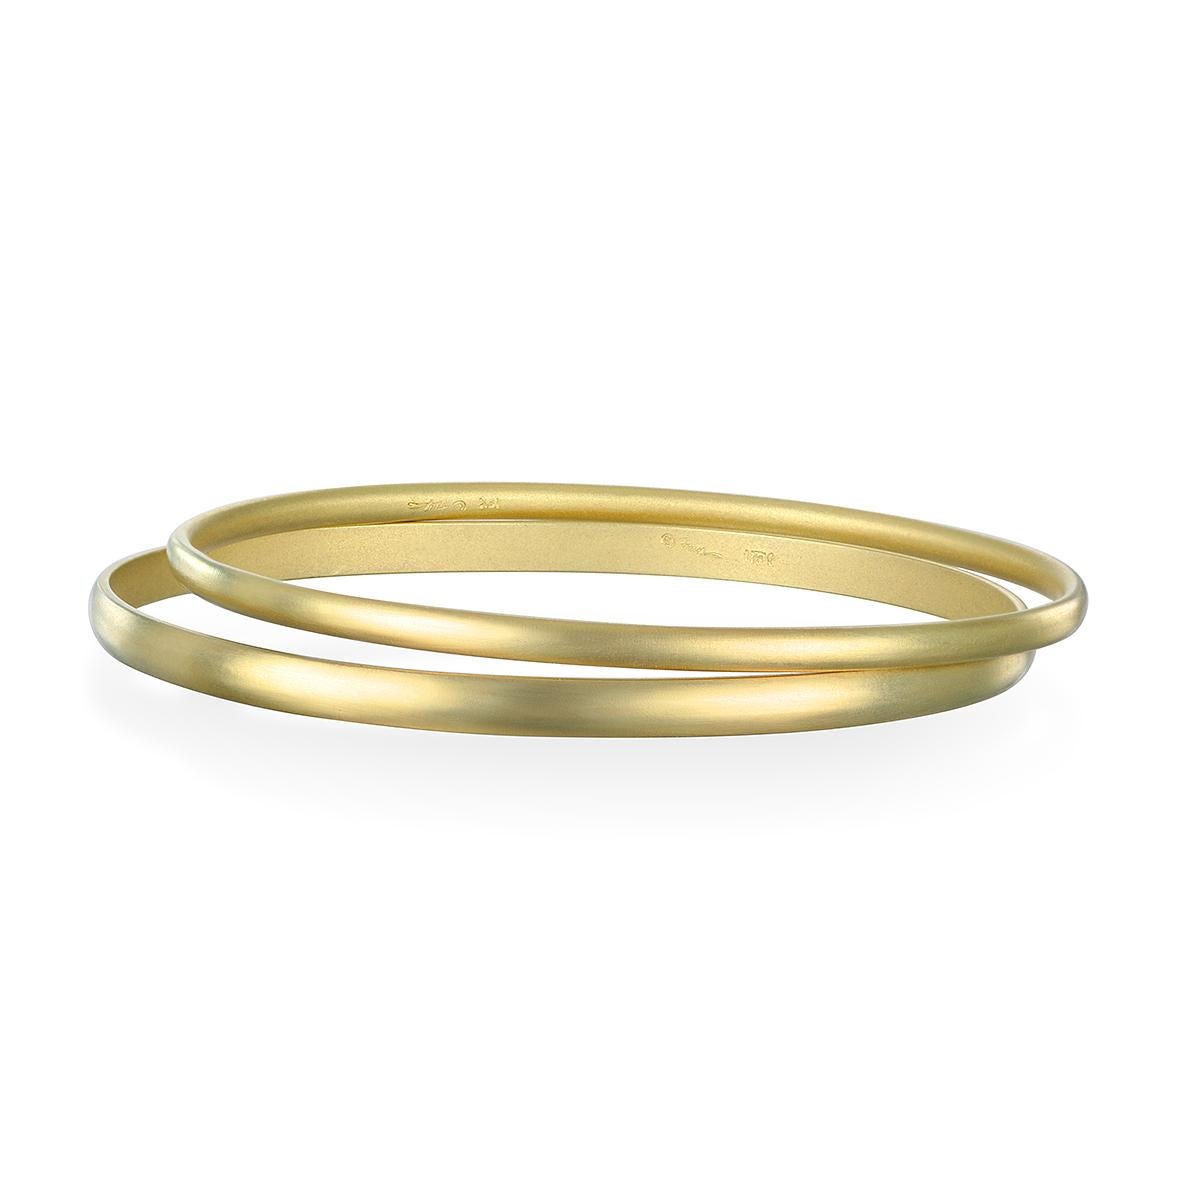 Faye Kim's 18 Karat Gold Oval Wire Bangle Bracelet will be essential to your jewelry wardrobe. This handmade bangle is matte-finished is perfect for stacking with other bangles and bracelets!

Inner diameter 2.5